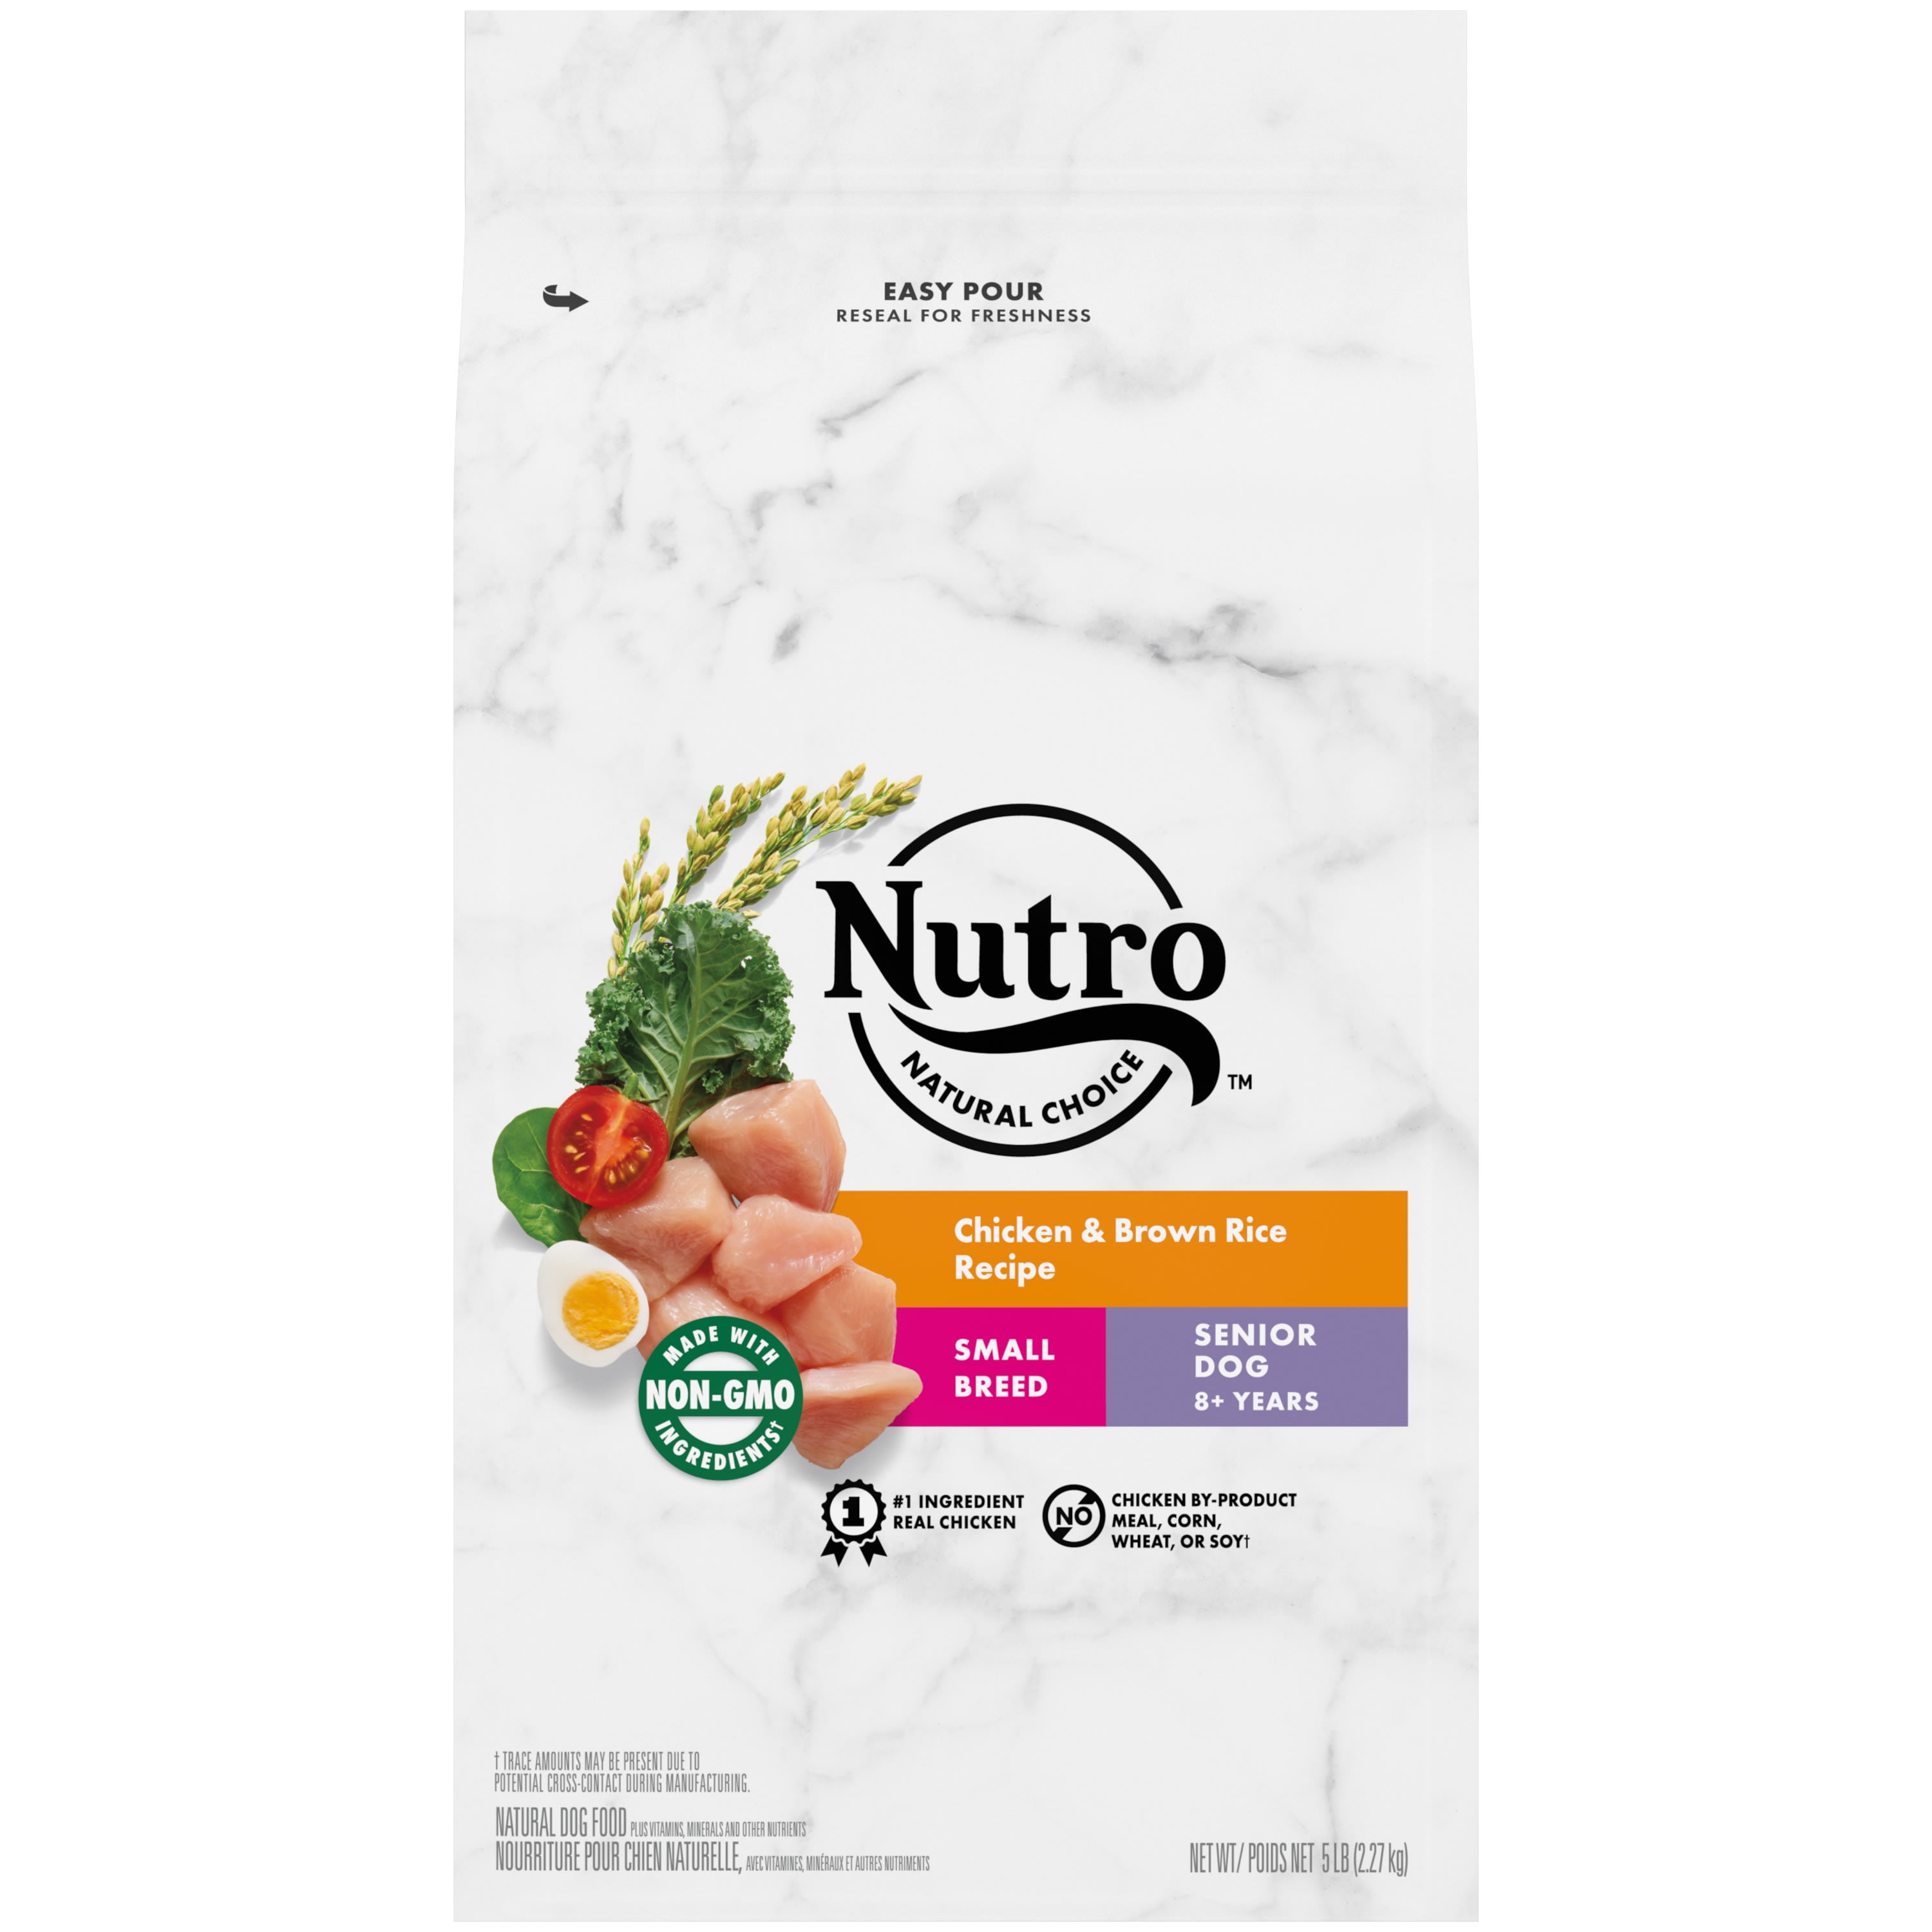 NUTRO NATURAL CHOICE Chicken & Brown Rice Flavor Dry Dog for Small Breed Senior Dog, 5 lb. Bag